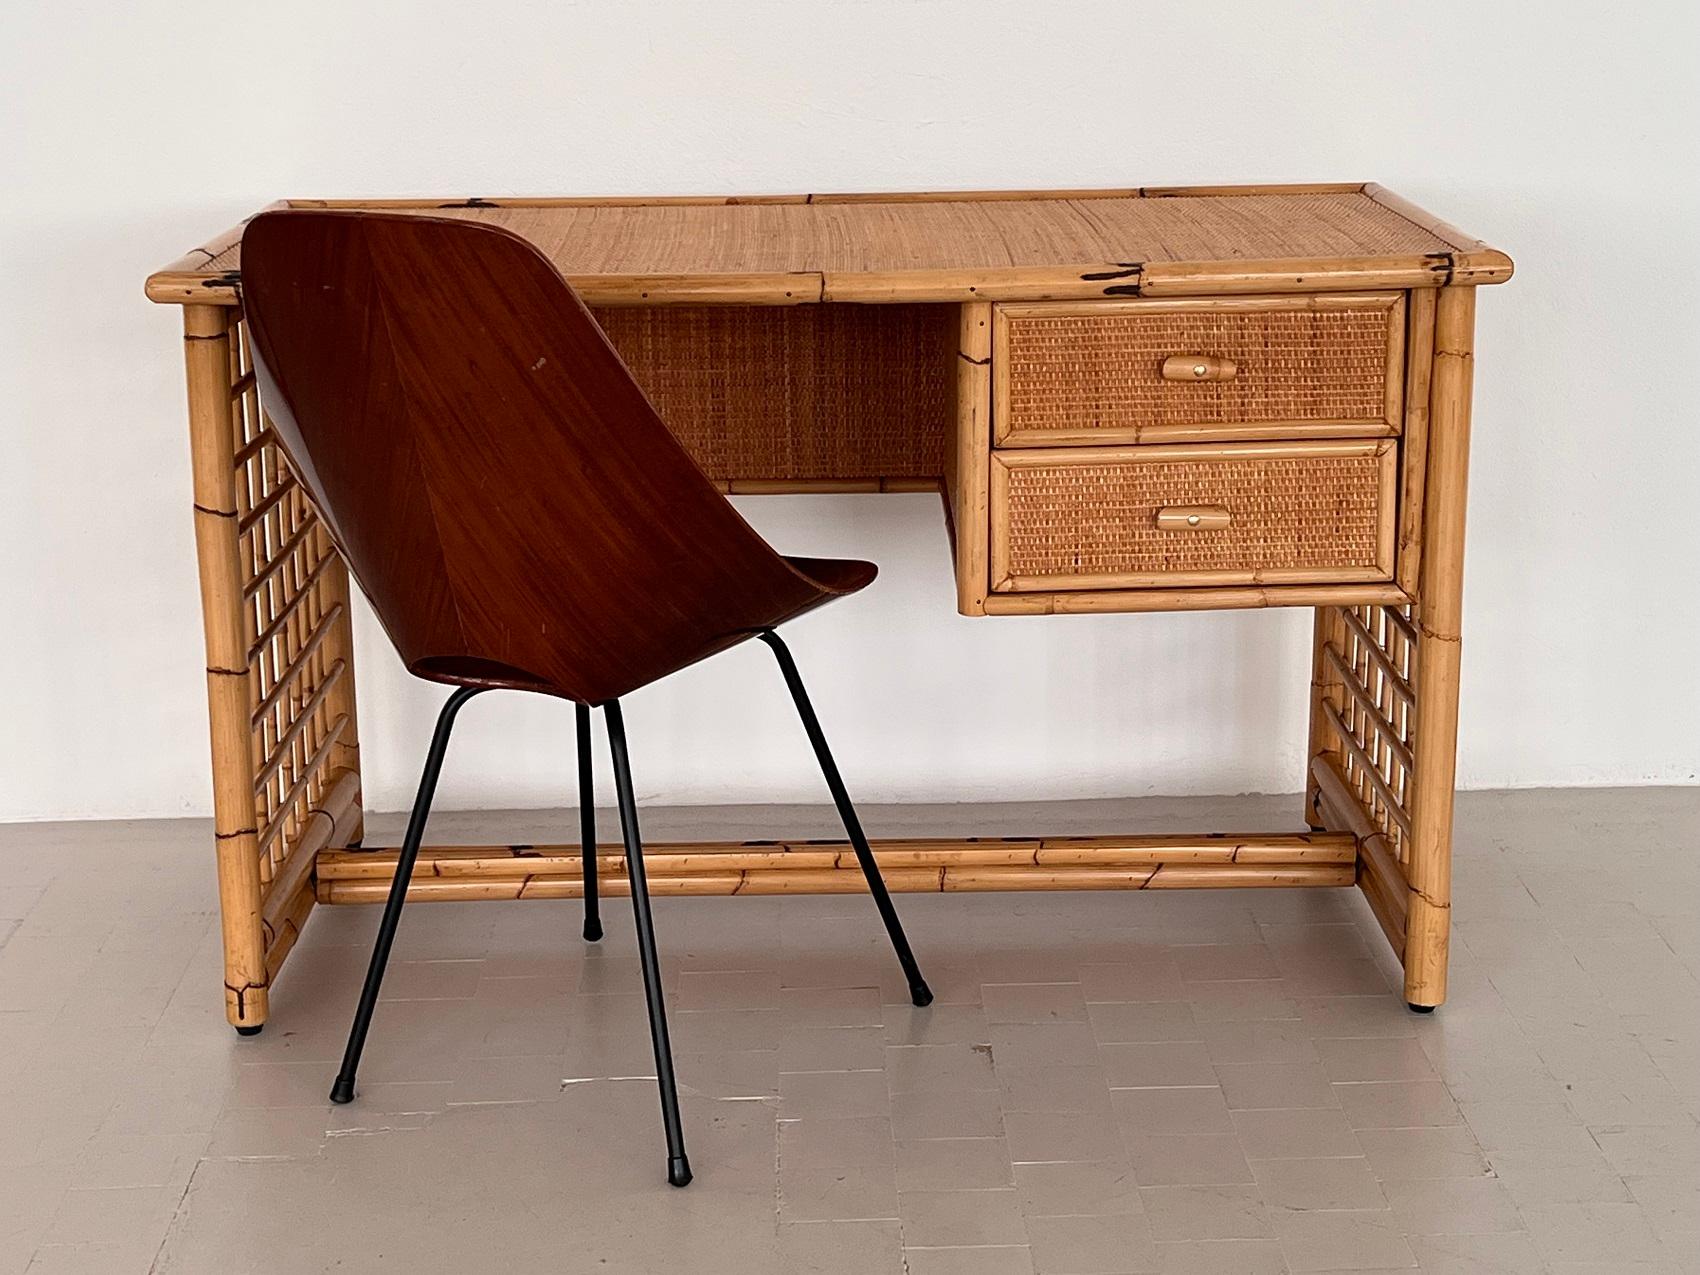 Italian Midcentury Bamboo and Rattan Desk or Vanity with two Drawers, 1970s For Sale 11